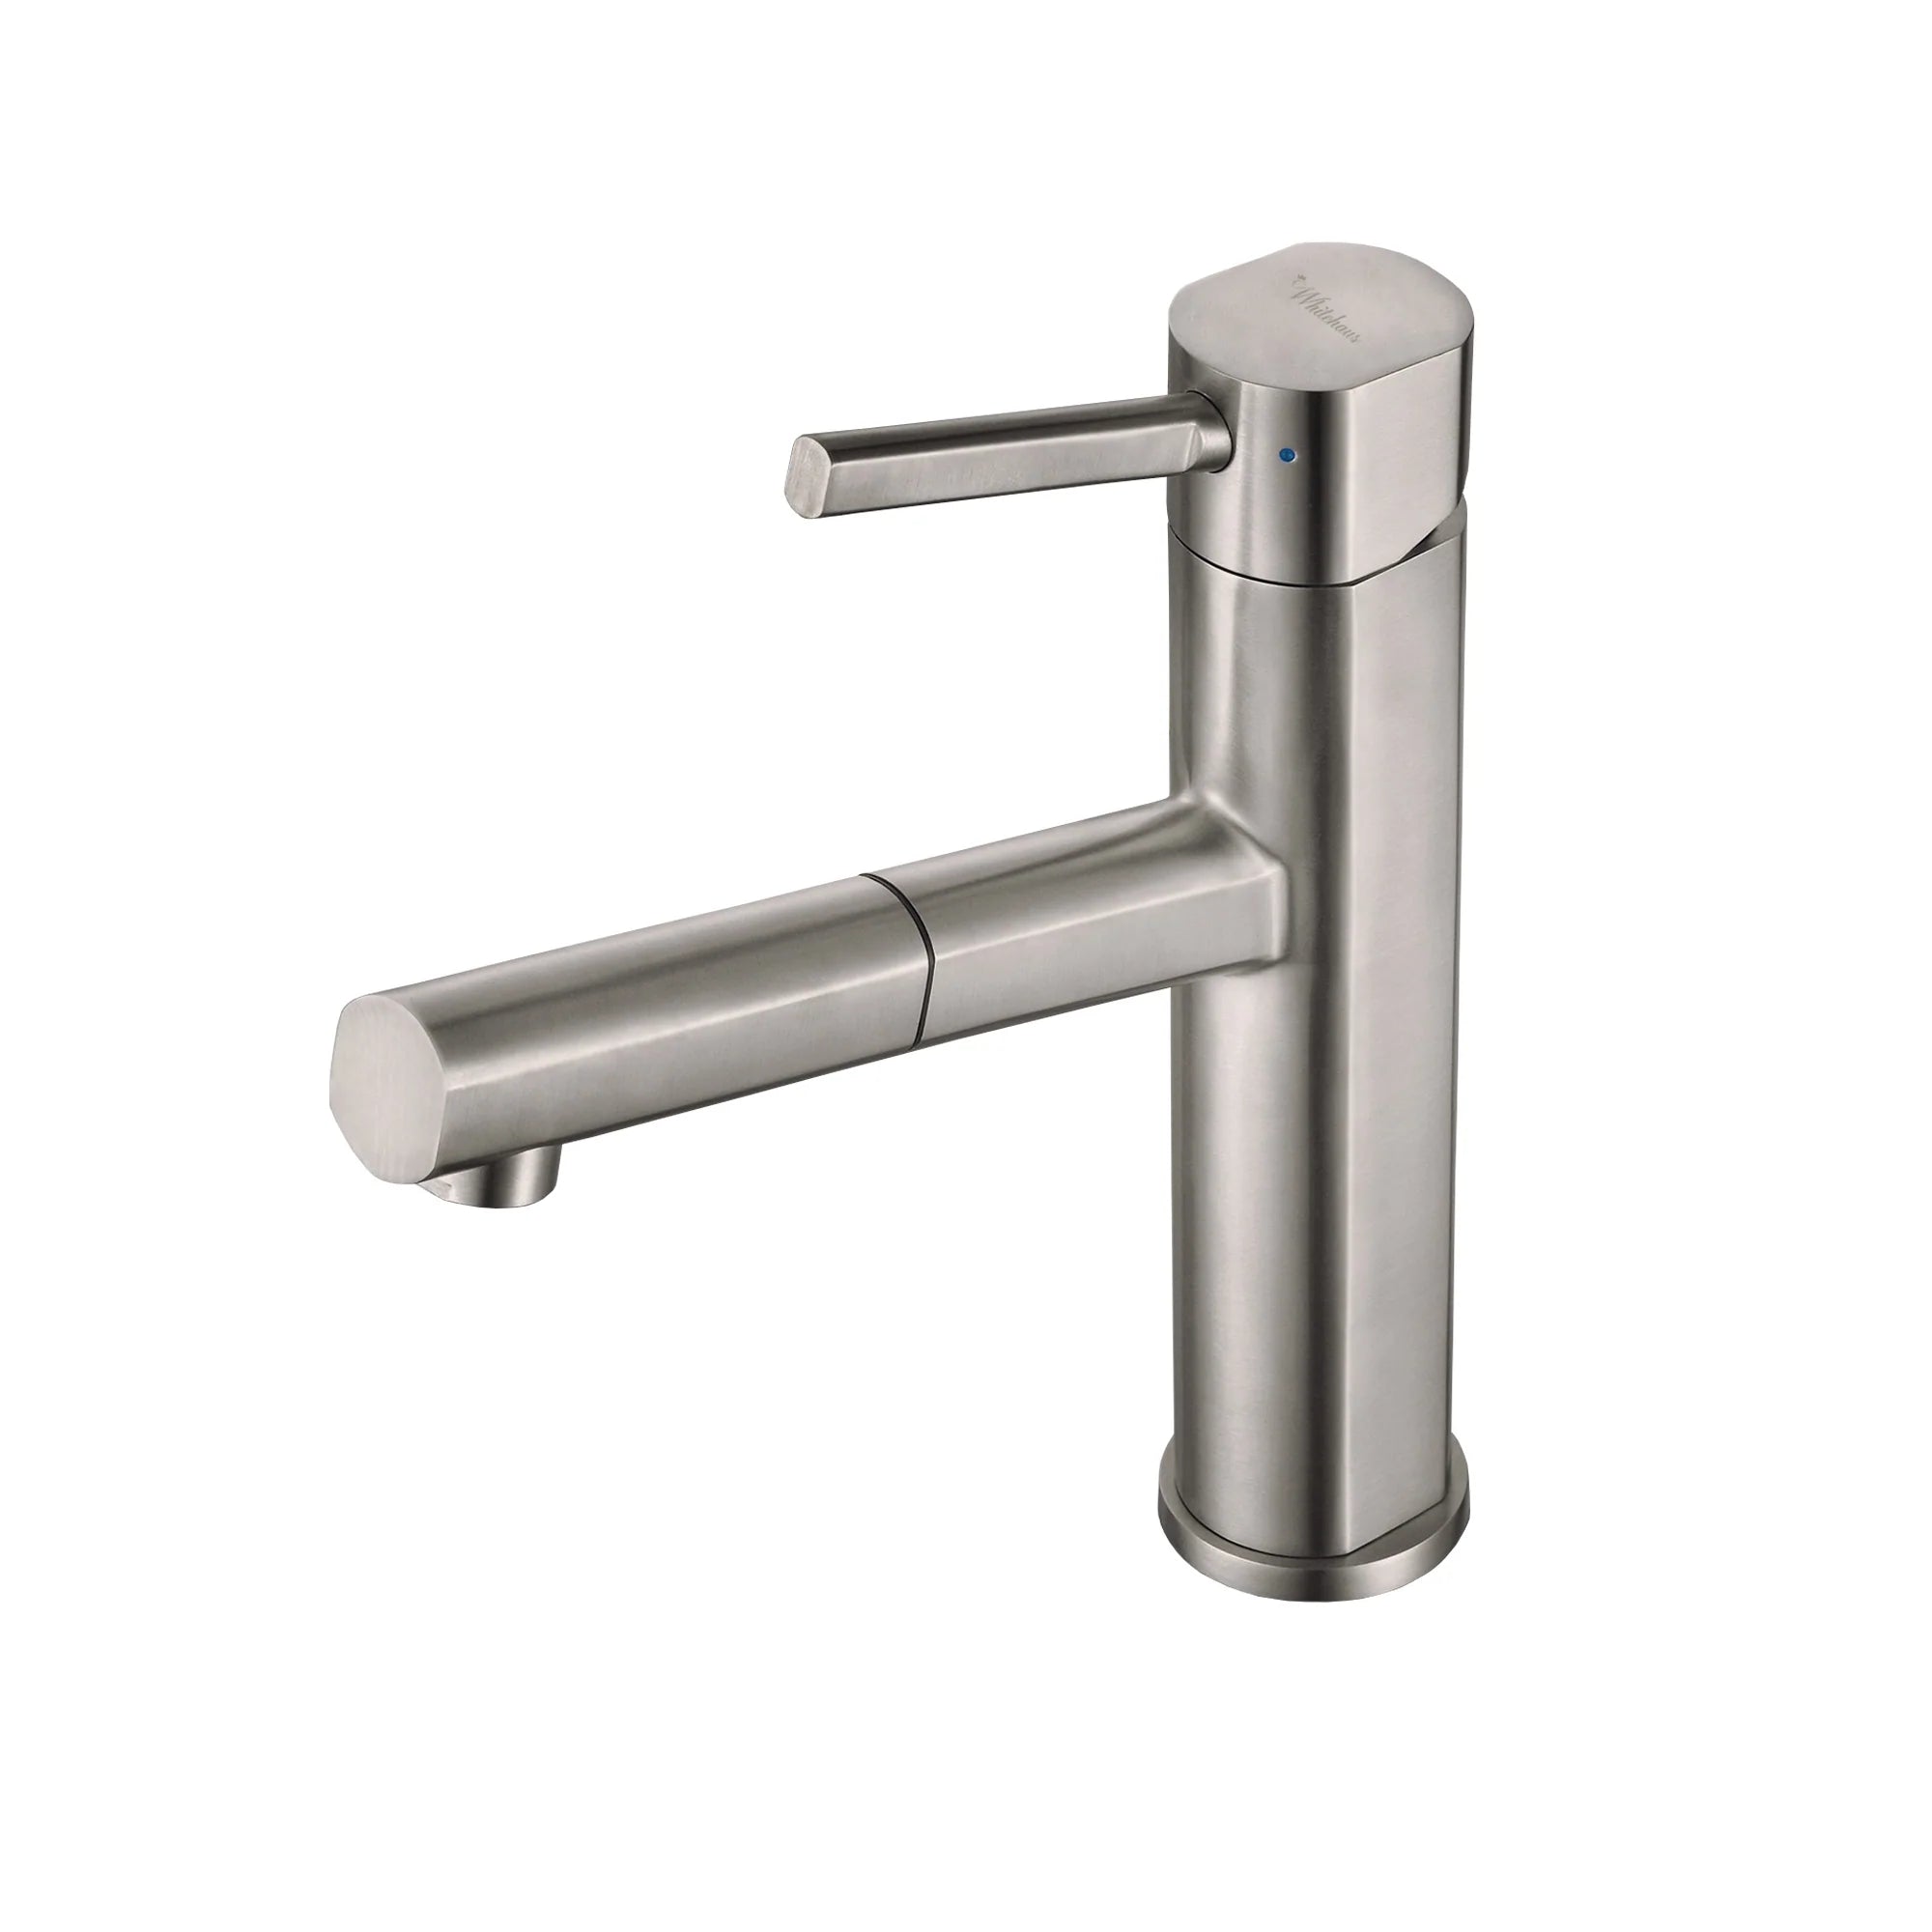 WHITEHAUS Solid Stainless Steel, Single Hole, Single Lever Kitchen Faucet with Pull-Out Spray Head - WHS1394-PSK